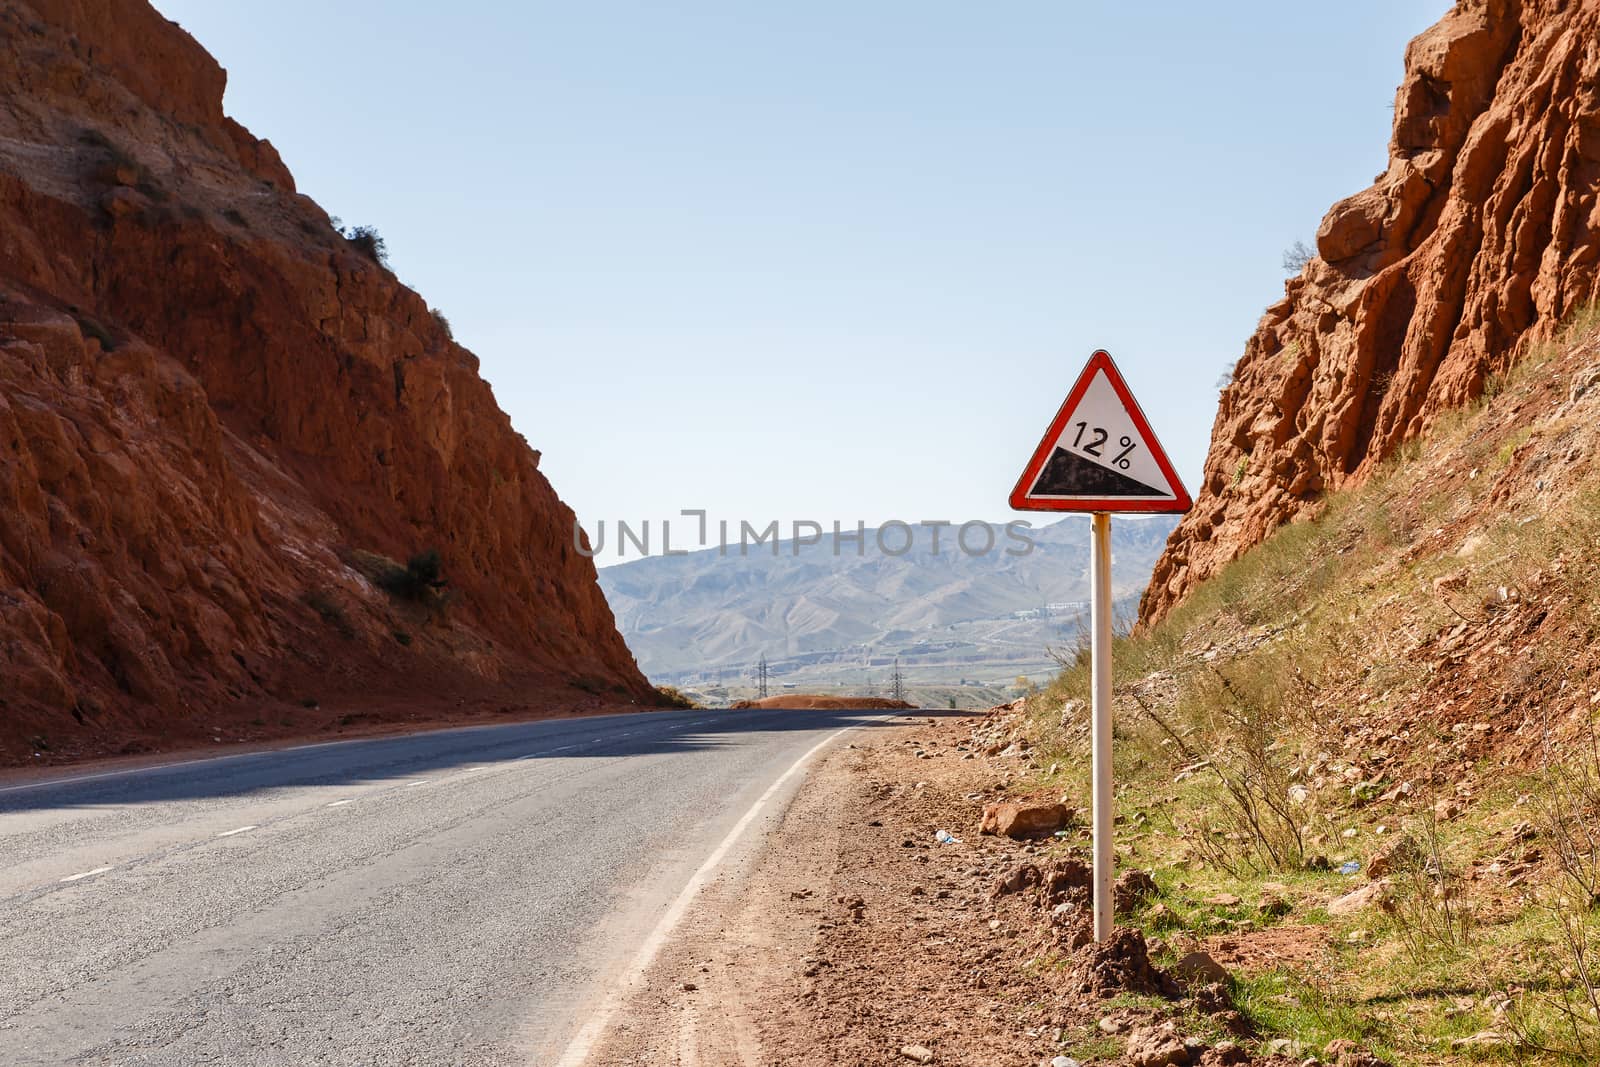 Downhill road sign with percentage on a mountain road, warning traffic sign kyrgyzstan